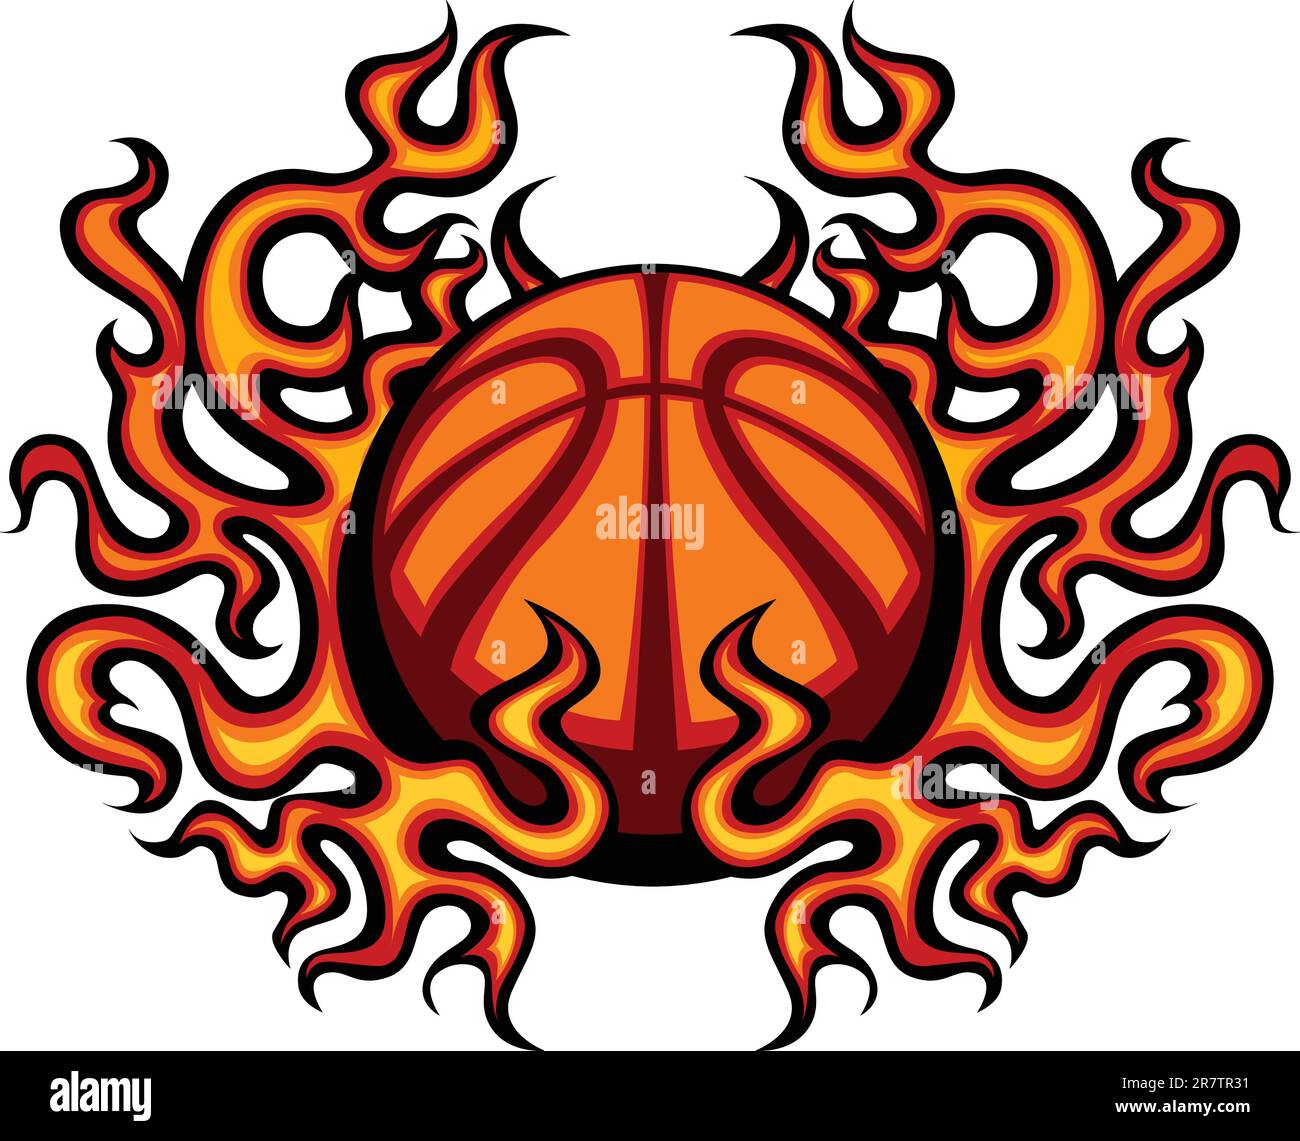 Basketball Vector Graphic image template with Flames Stock Vector